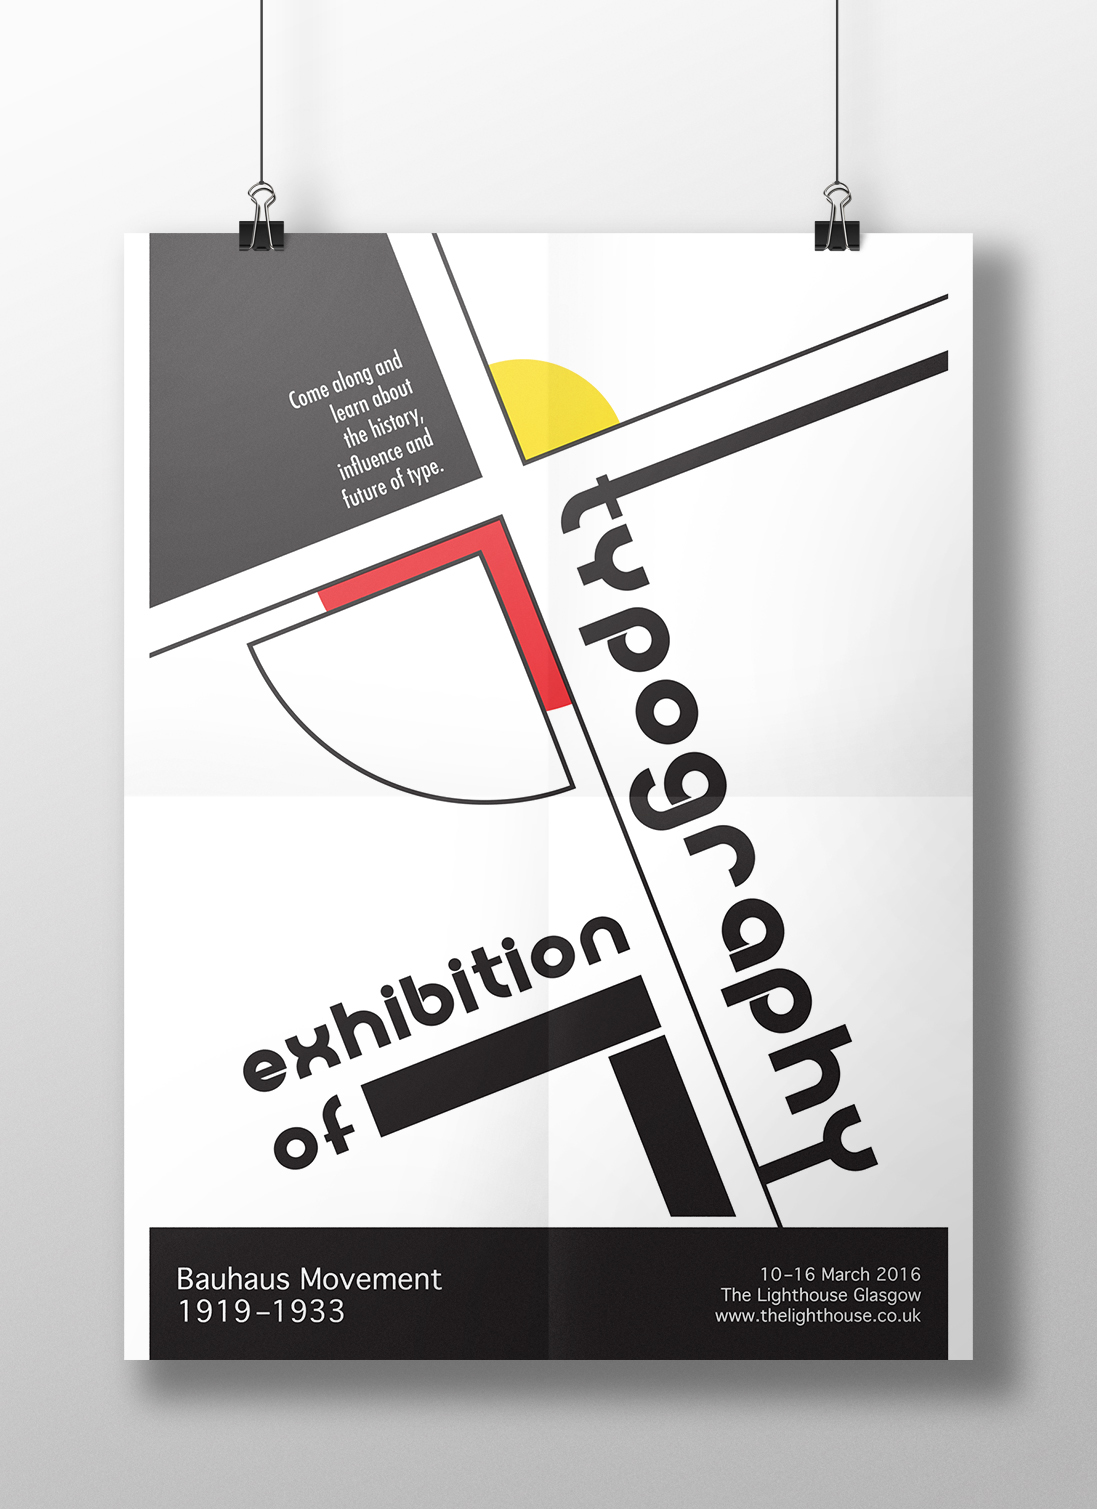 Exhibition  type exhibition of typography swiss style swiss constructivism russian bauhaus postmodern poster Poster Design modern campaign glasgow scotland